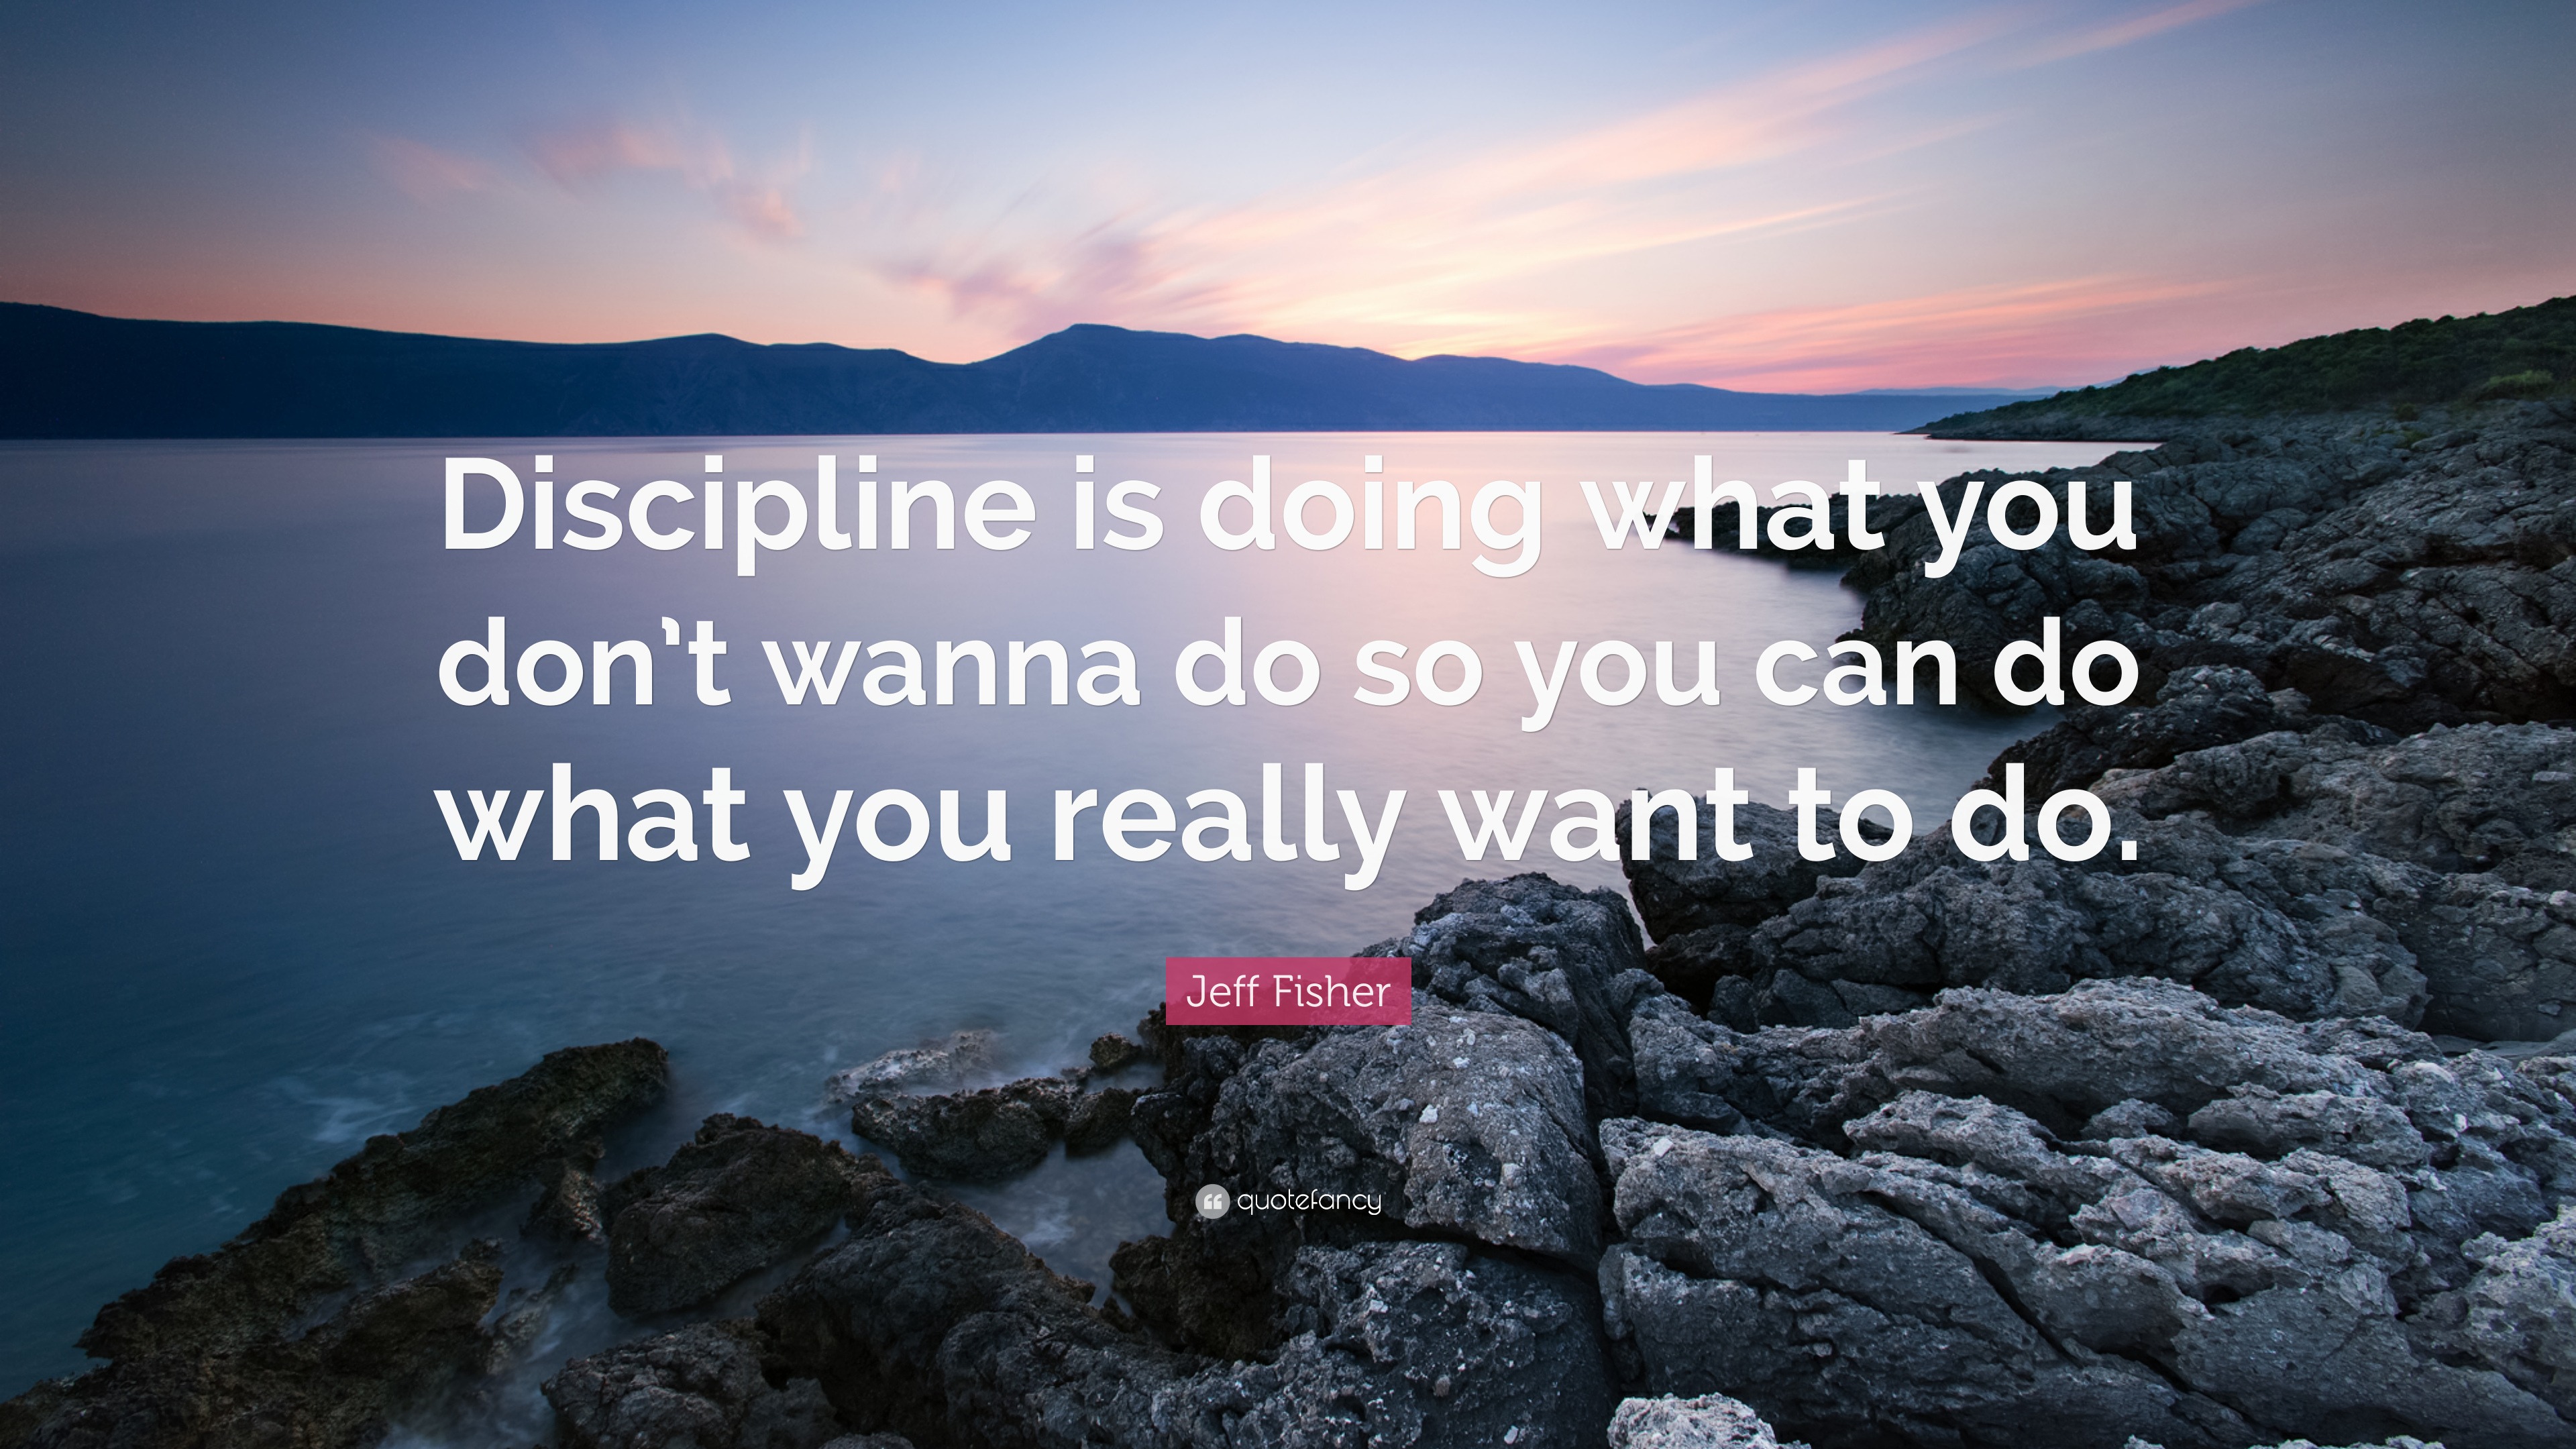 Jeff Fisher Quote: “Discipline is doing what you don’t wanna do so you ...